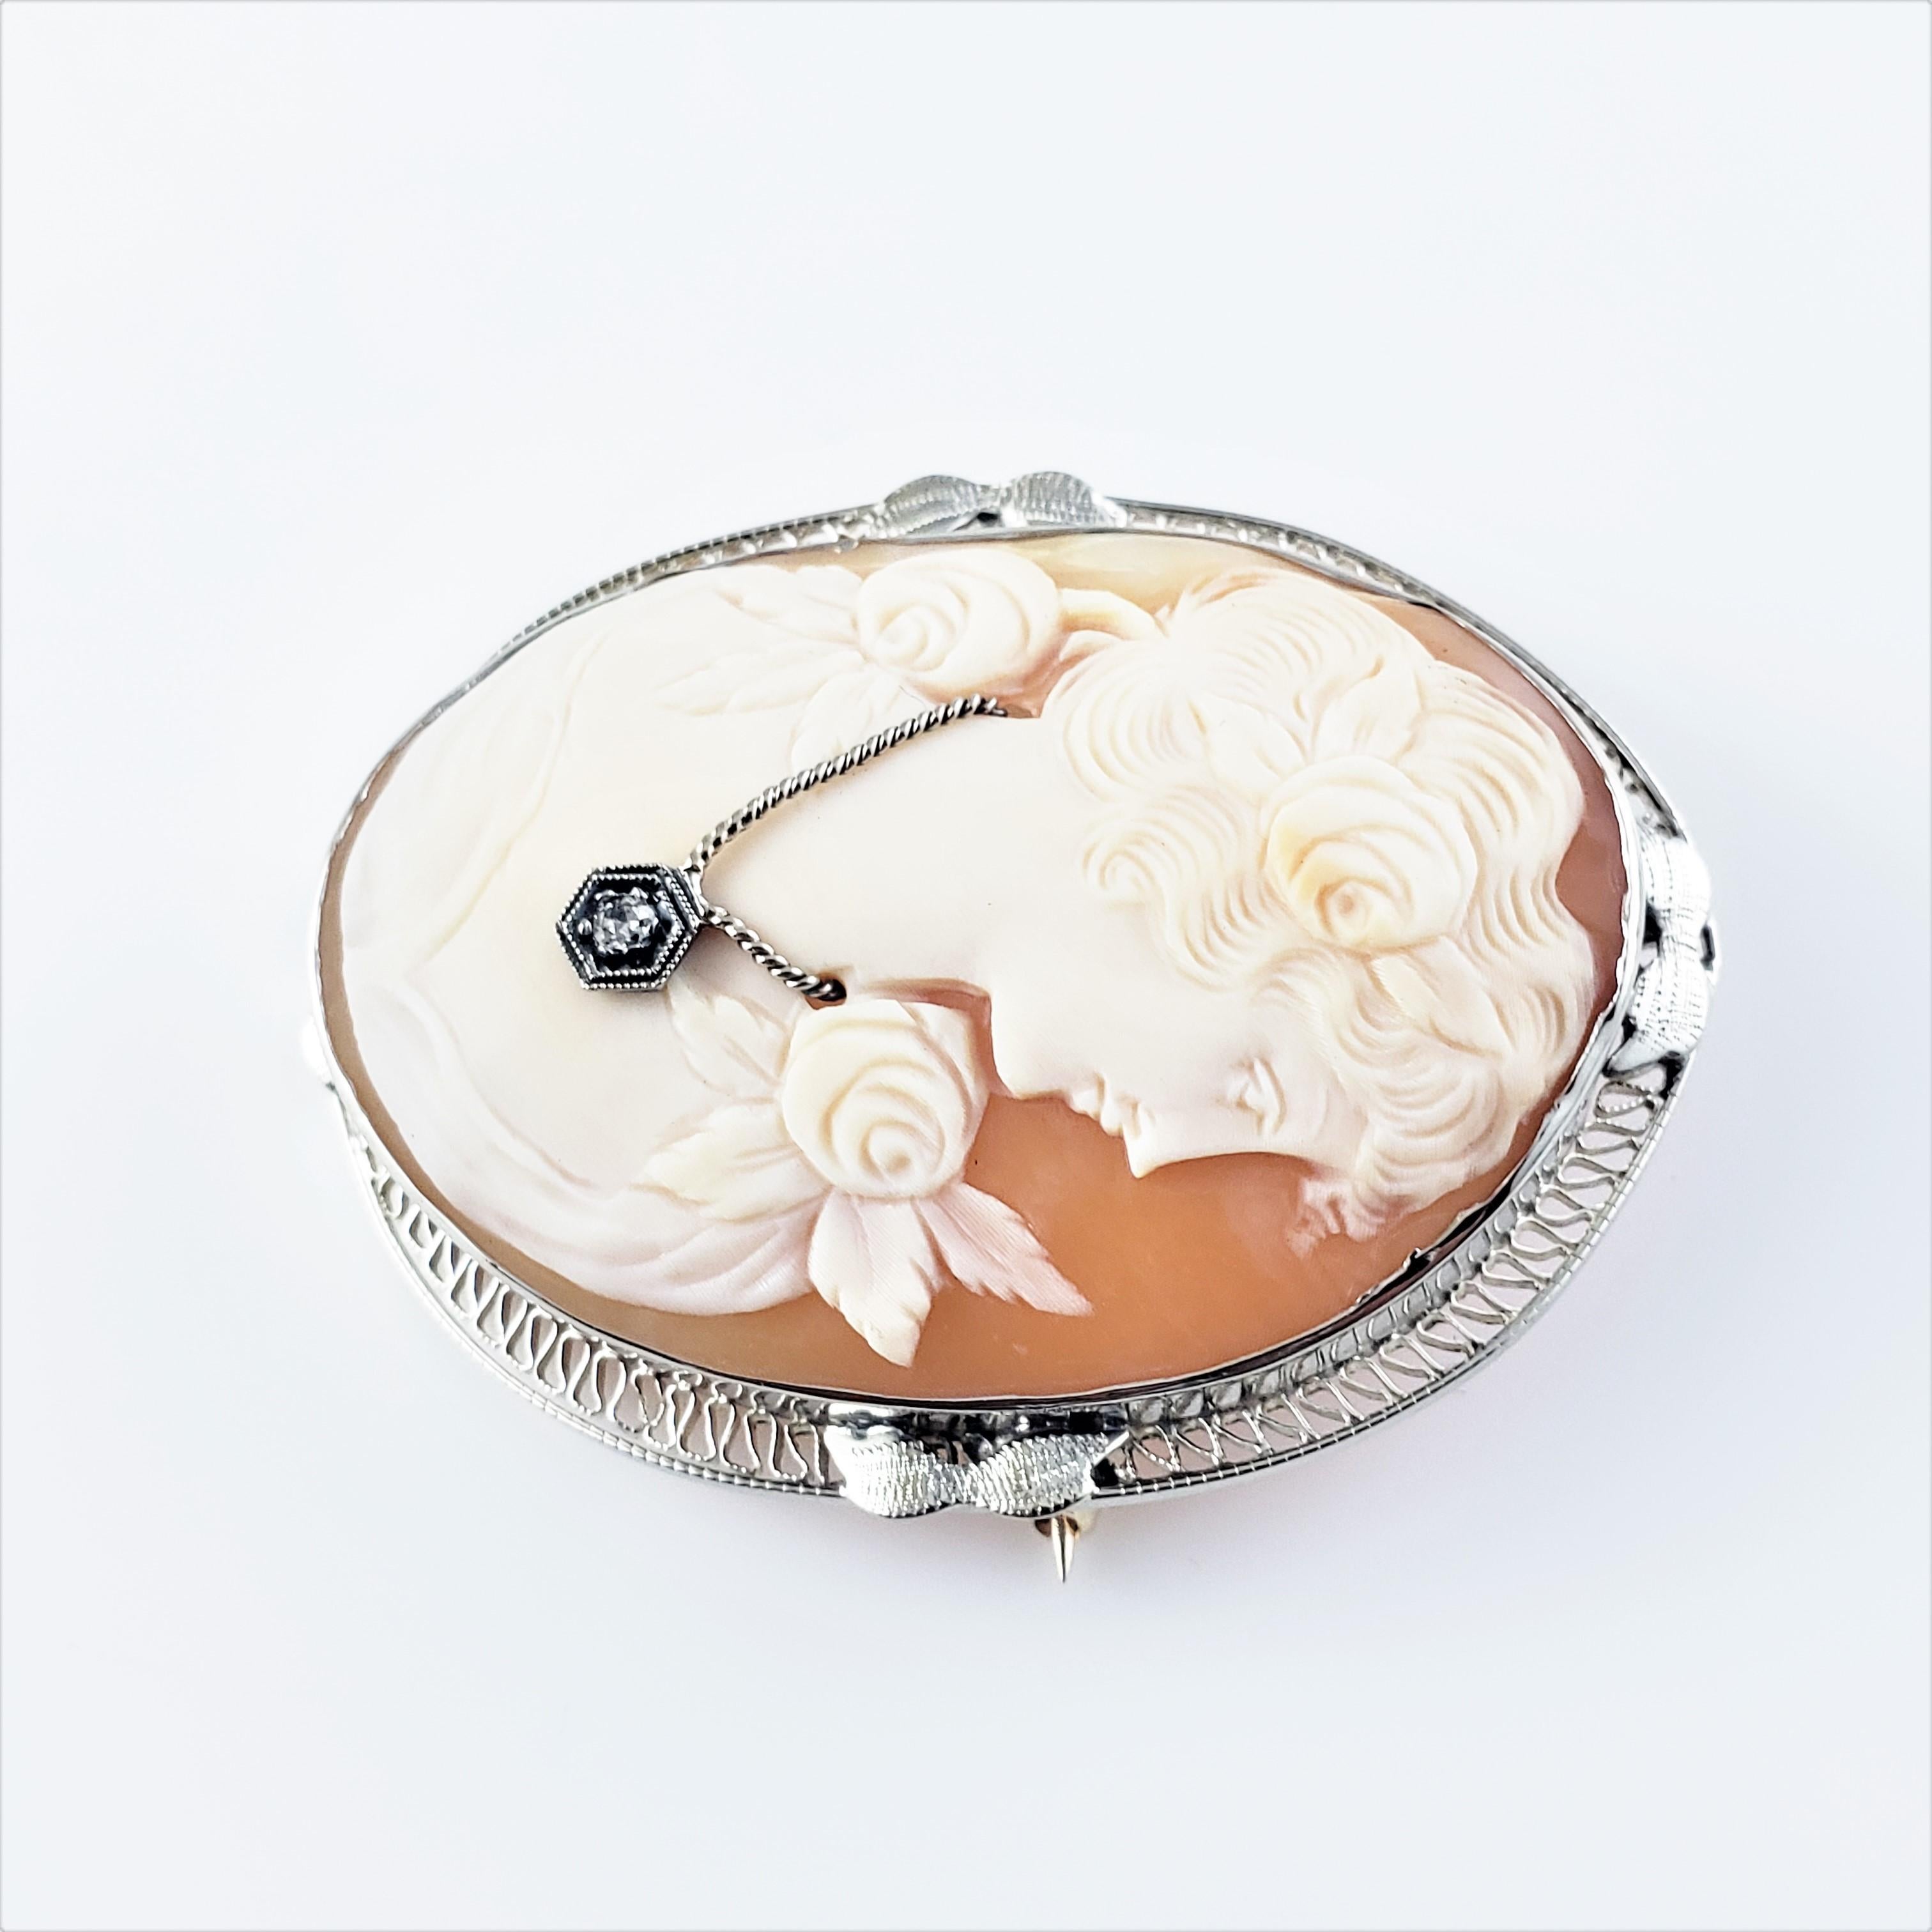 14 Karat White Gold Cameo Brooch/Pin-

This elegant cameo features a lovely lady in profile framed in beautifully detailed 14K white gold filigree.  Accented with one round single cut diamond.

Approximate total diamond weight:  .01 ct.

Diamond